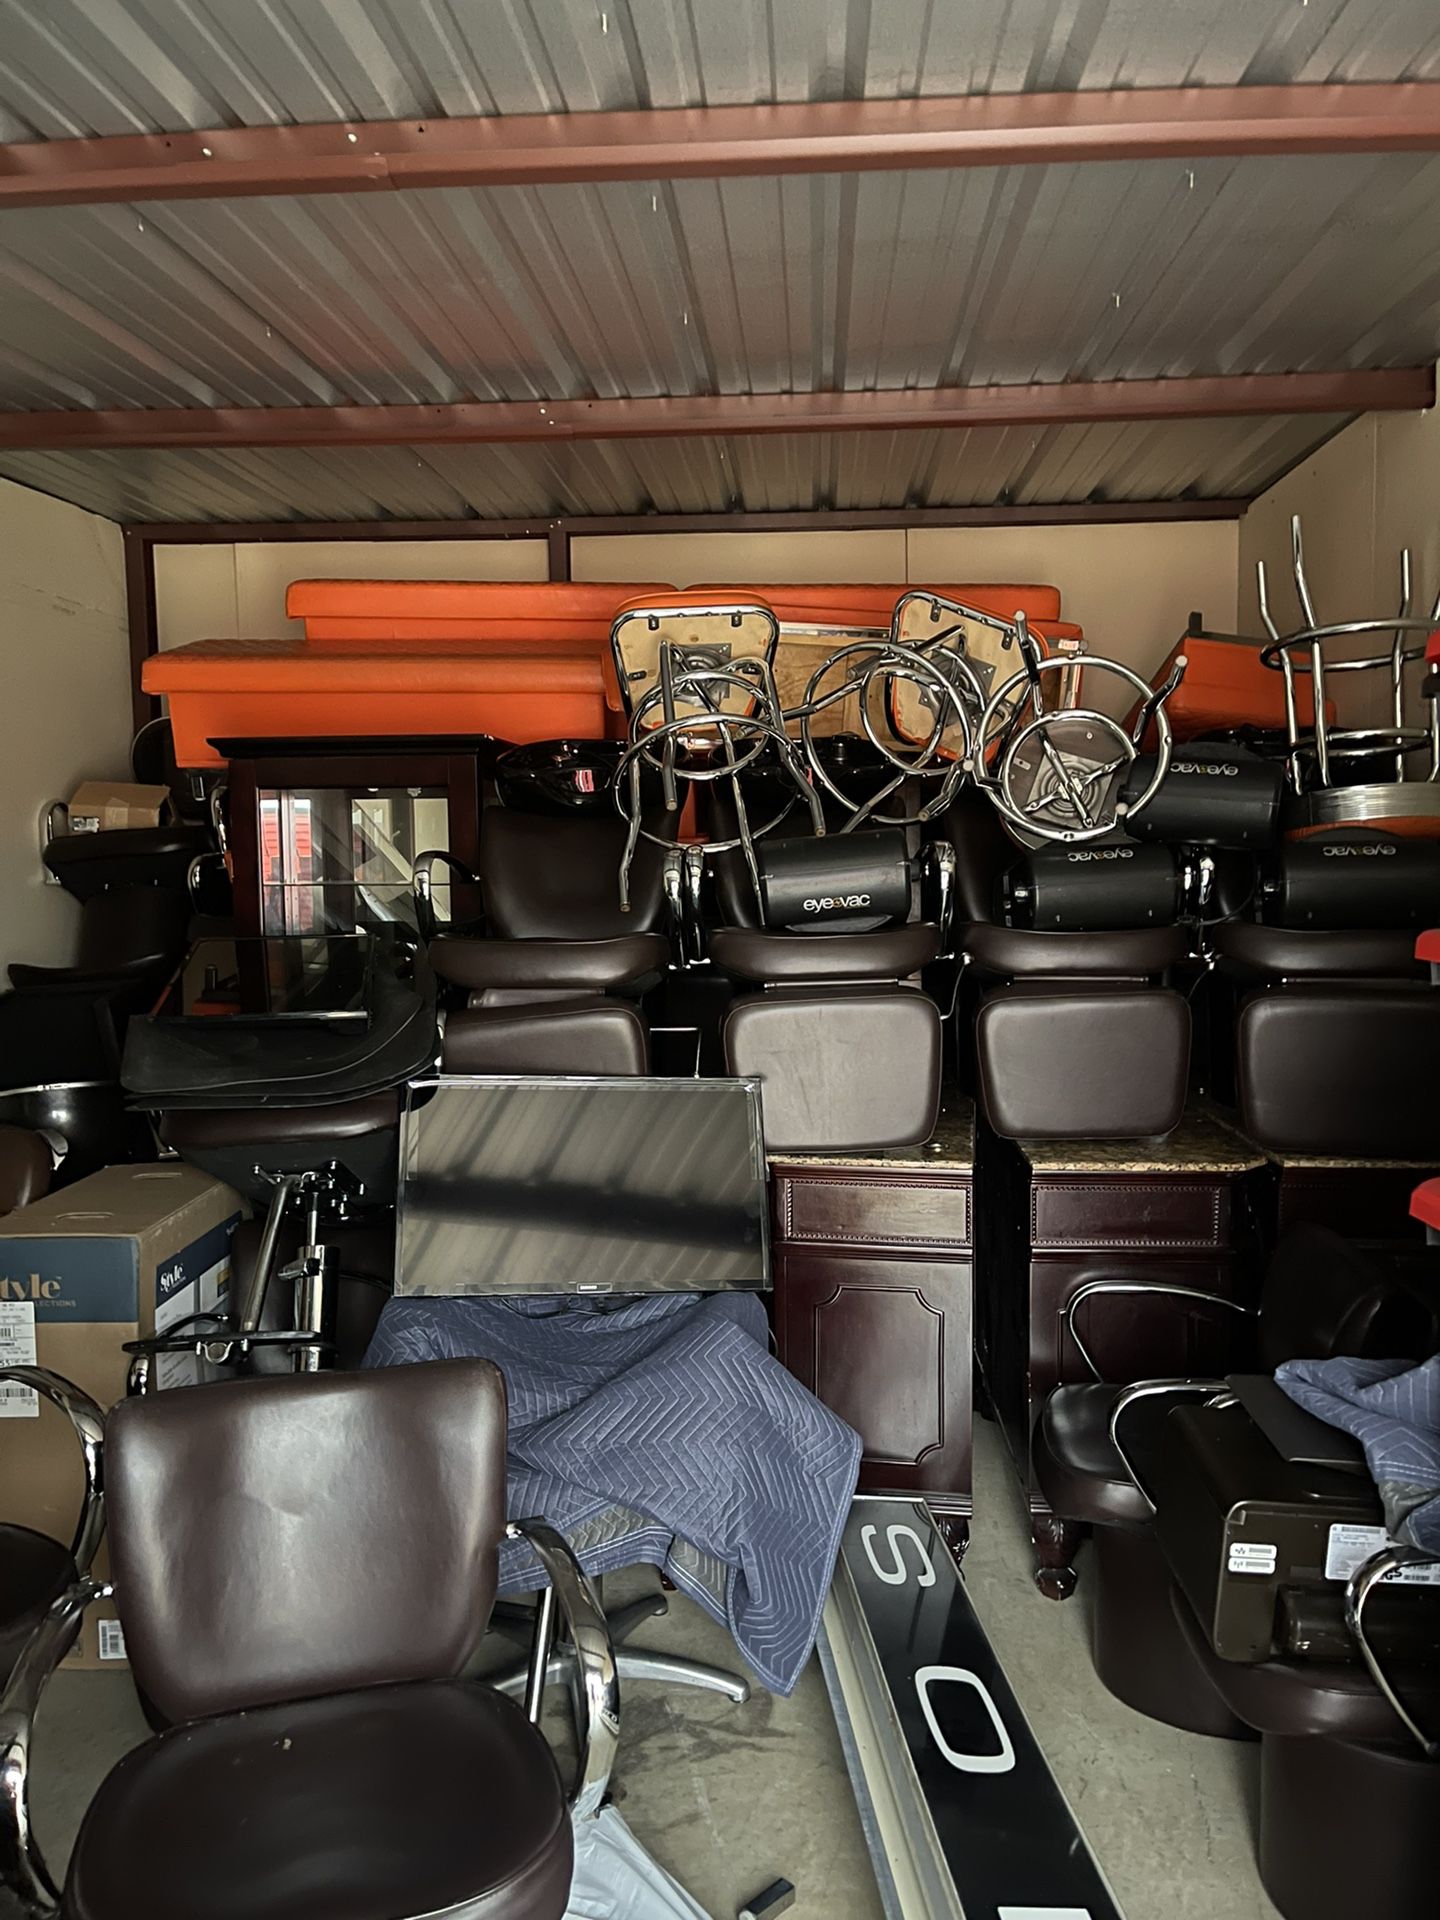 11 Complete Salon Rooms For Sale Will Sale Indiviual Rooms For $2000 Are All As A Package No Piece By Piece Thank You